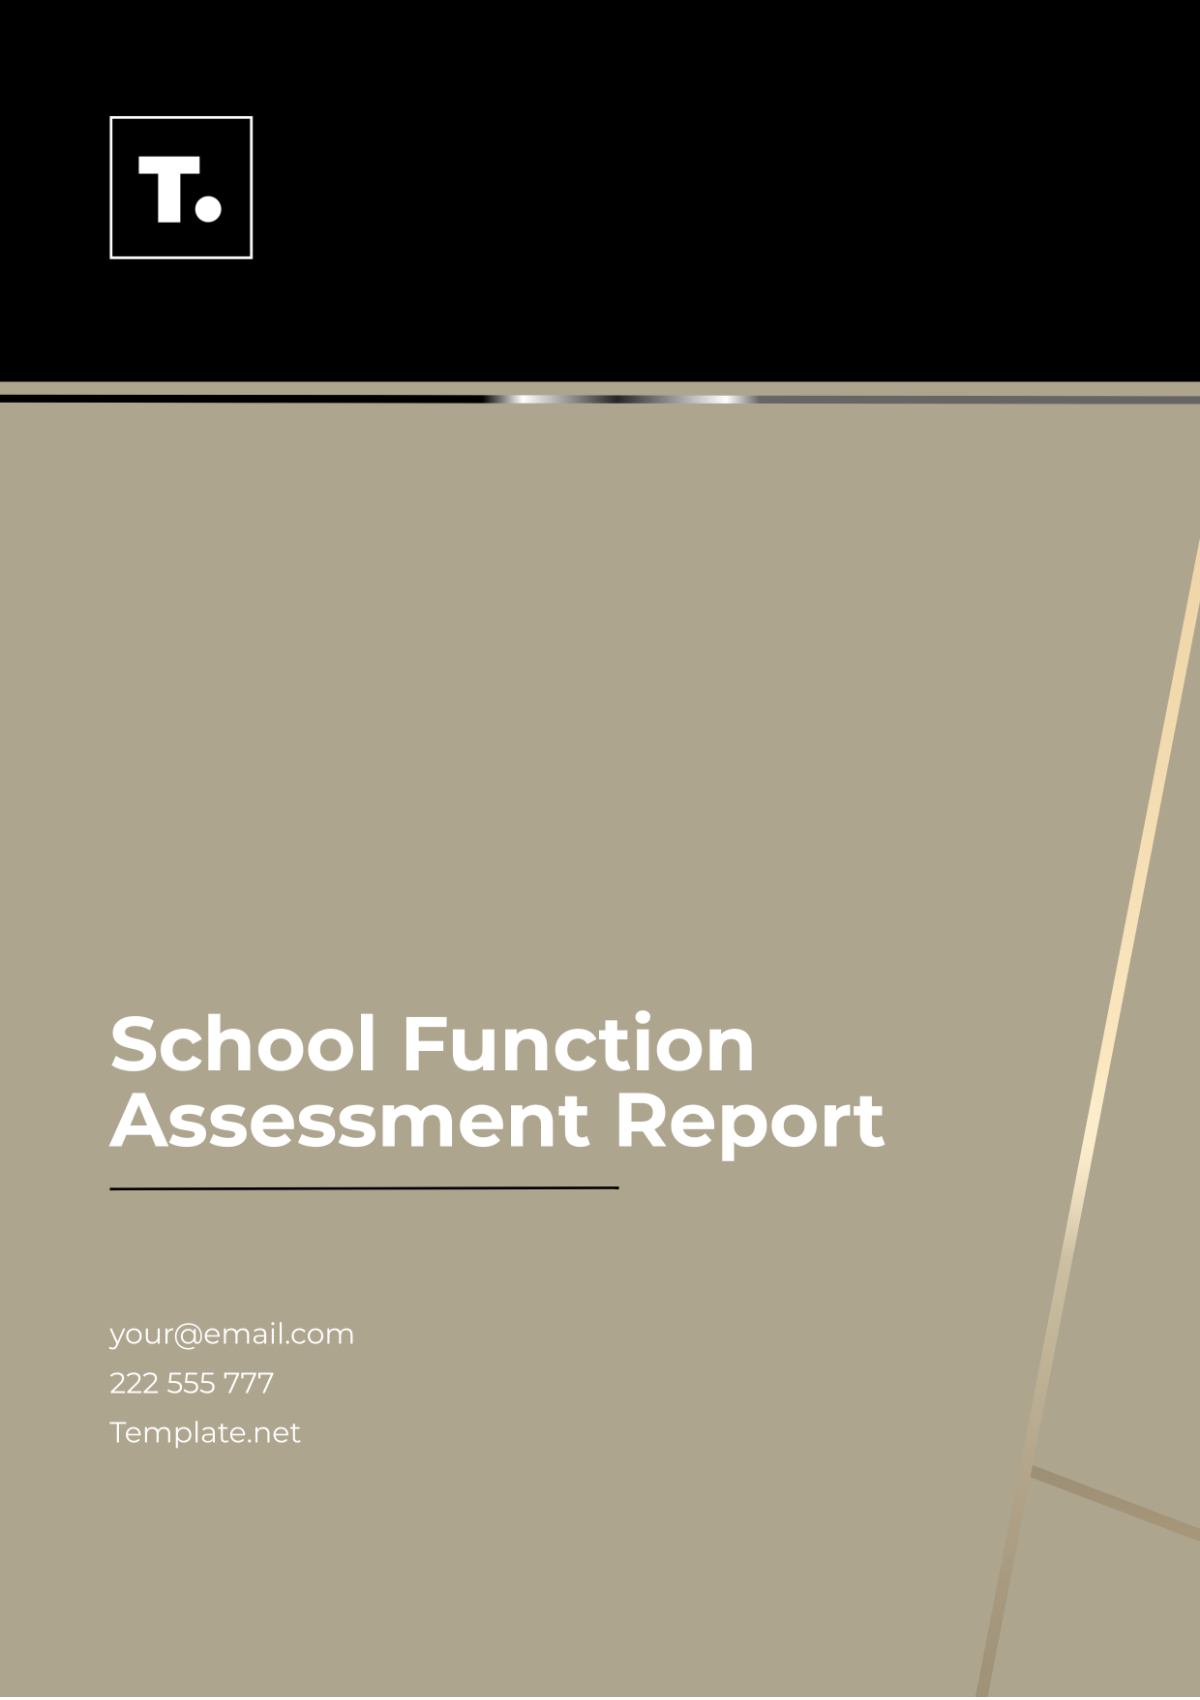 School Function Assessment Report Template